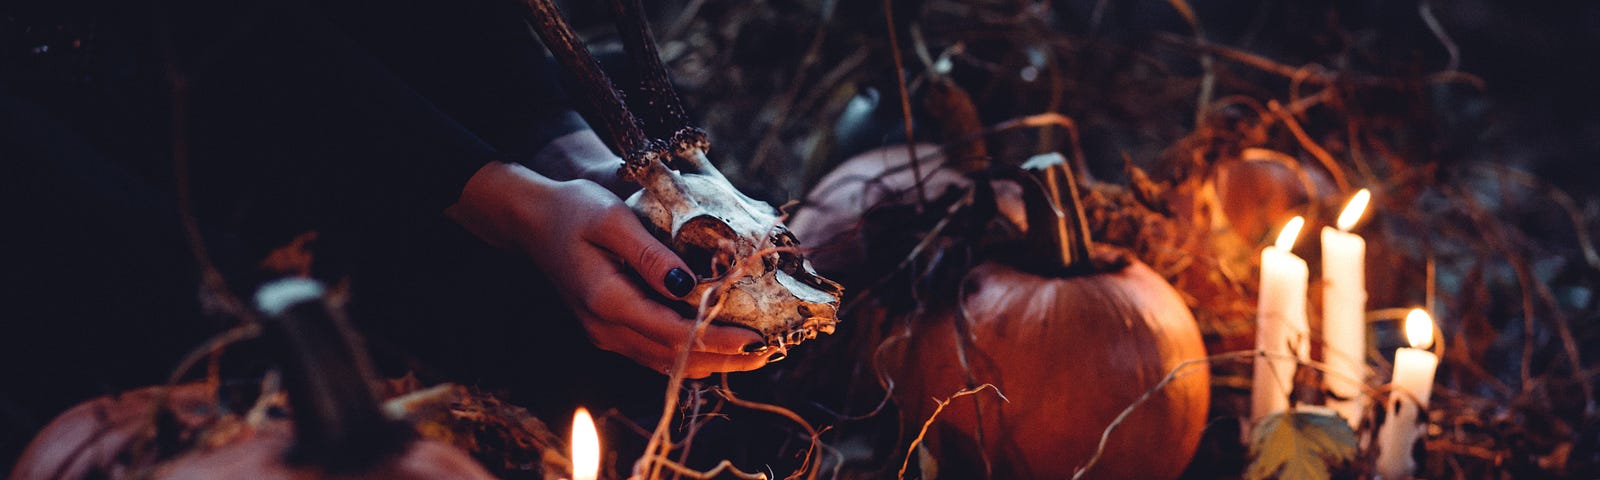 Hands holding an animal skull with spooky pumpkins and candles